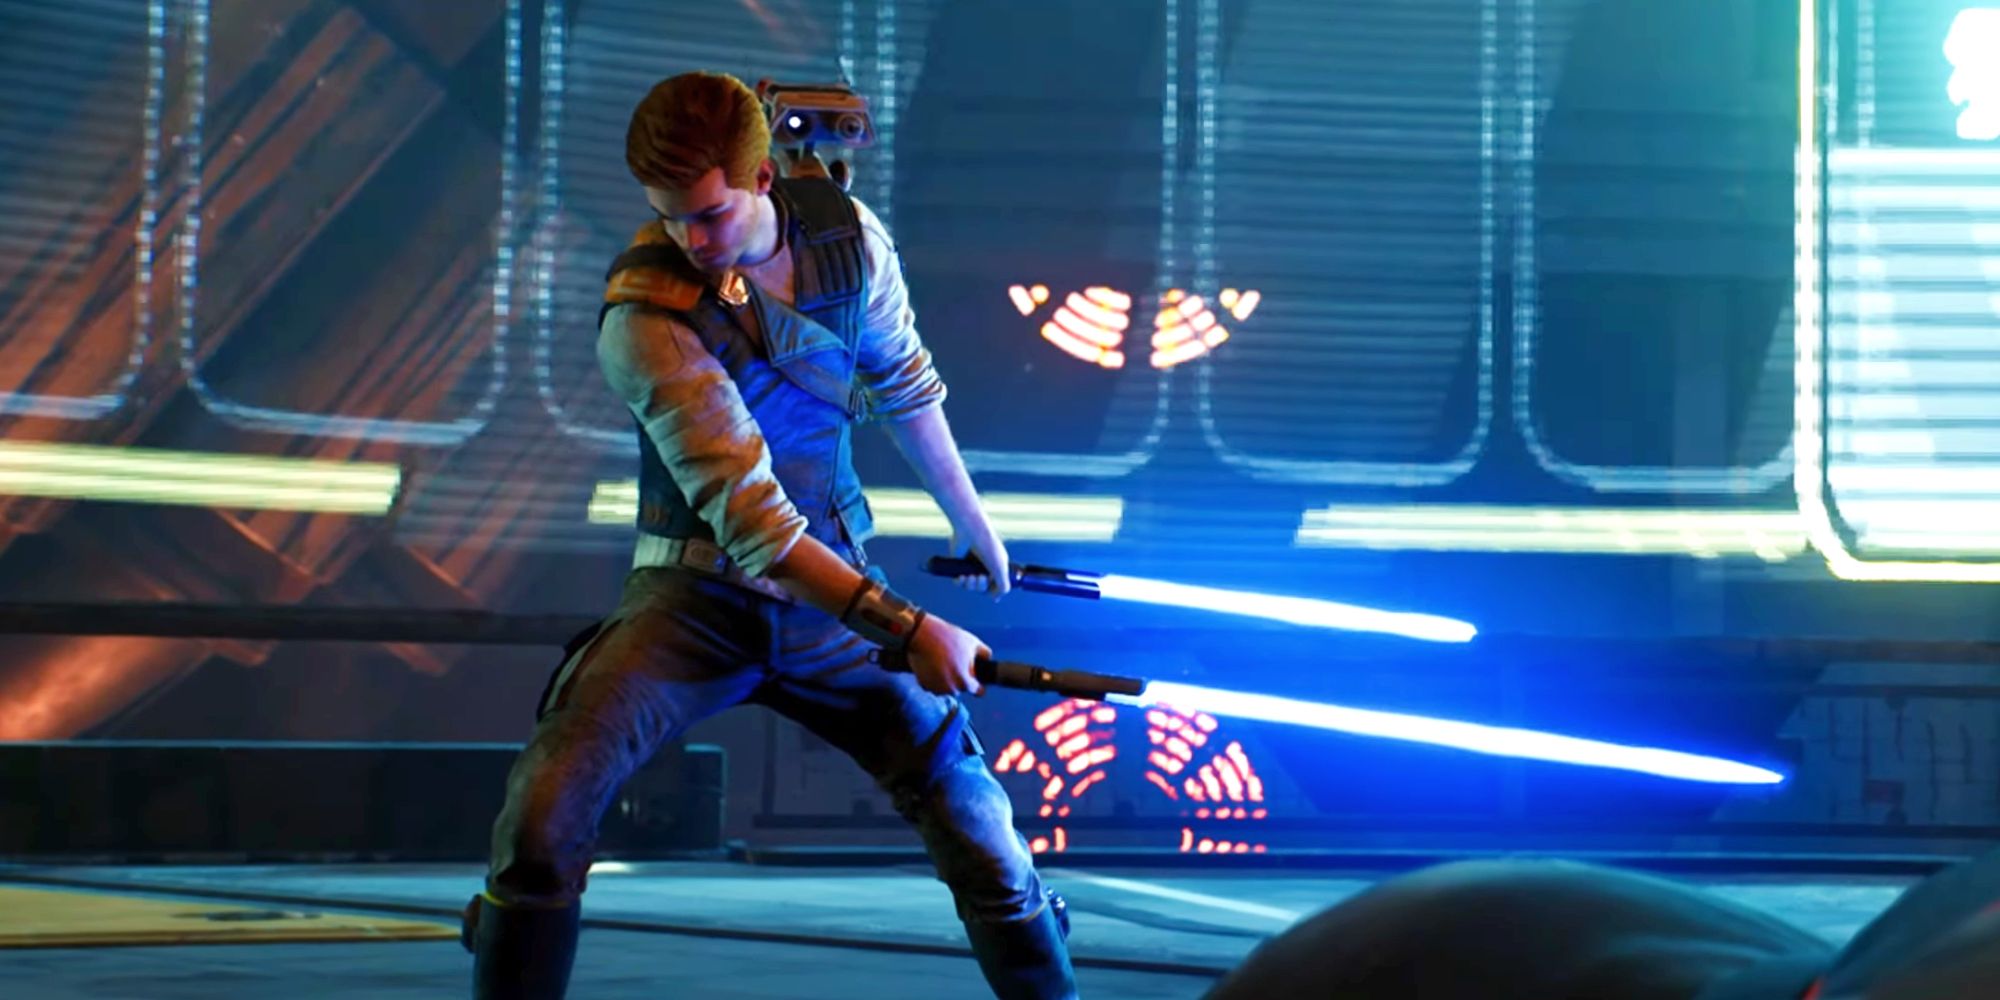 Cal Kestis with BD-1 on his shoulder holding his dual wield lightsabers parallel to one another pointing away from his left hip. Cal looks down solemnly after defeating the Ninth Sister, whose body lies partially in the bottom right corner of the frame.